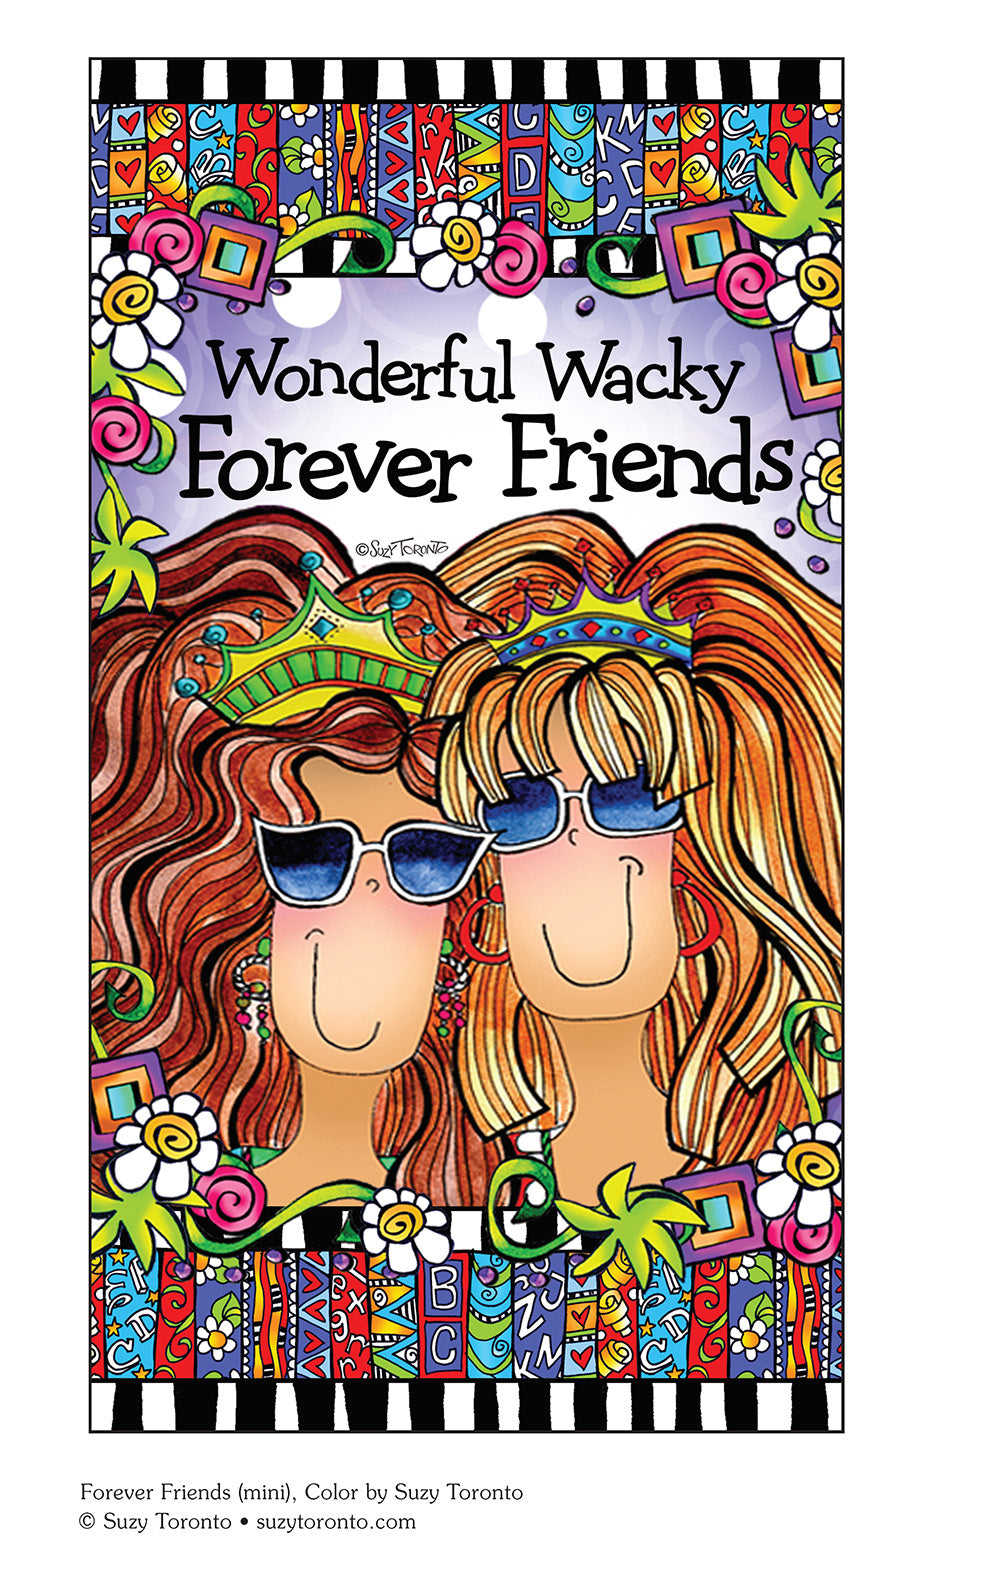 Color Friendship Coloring Book